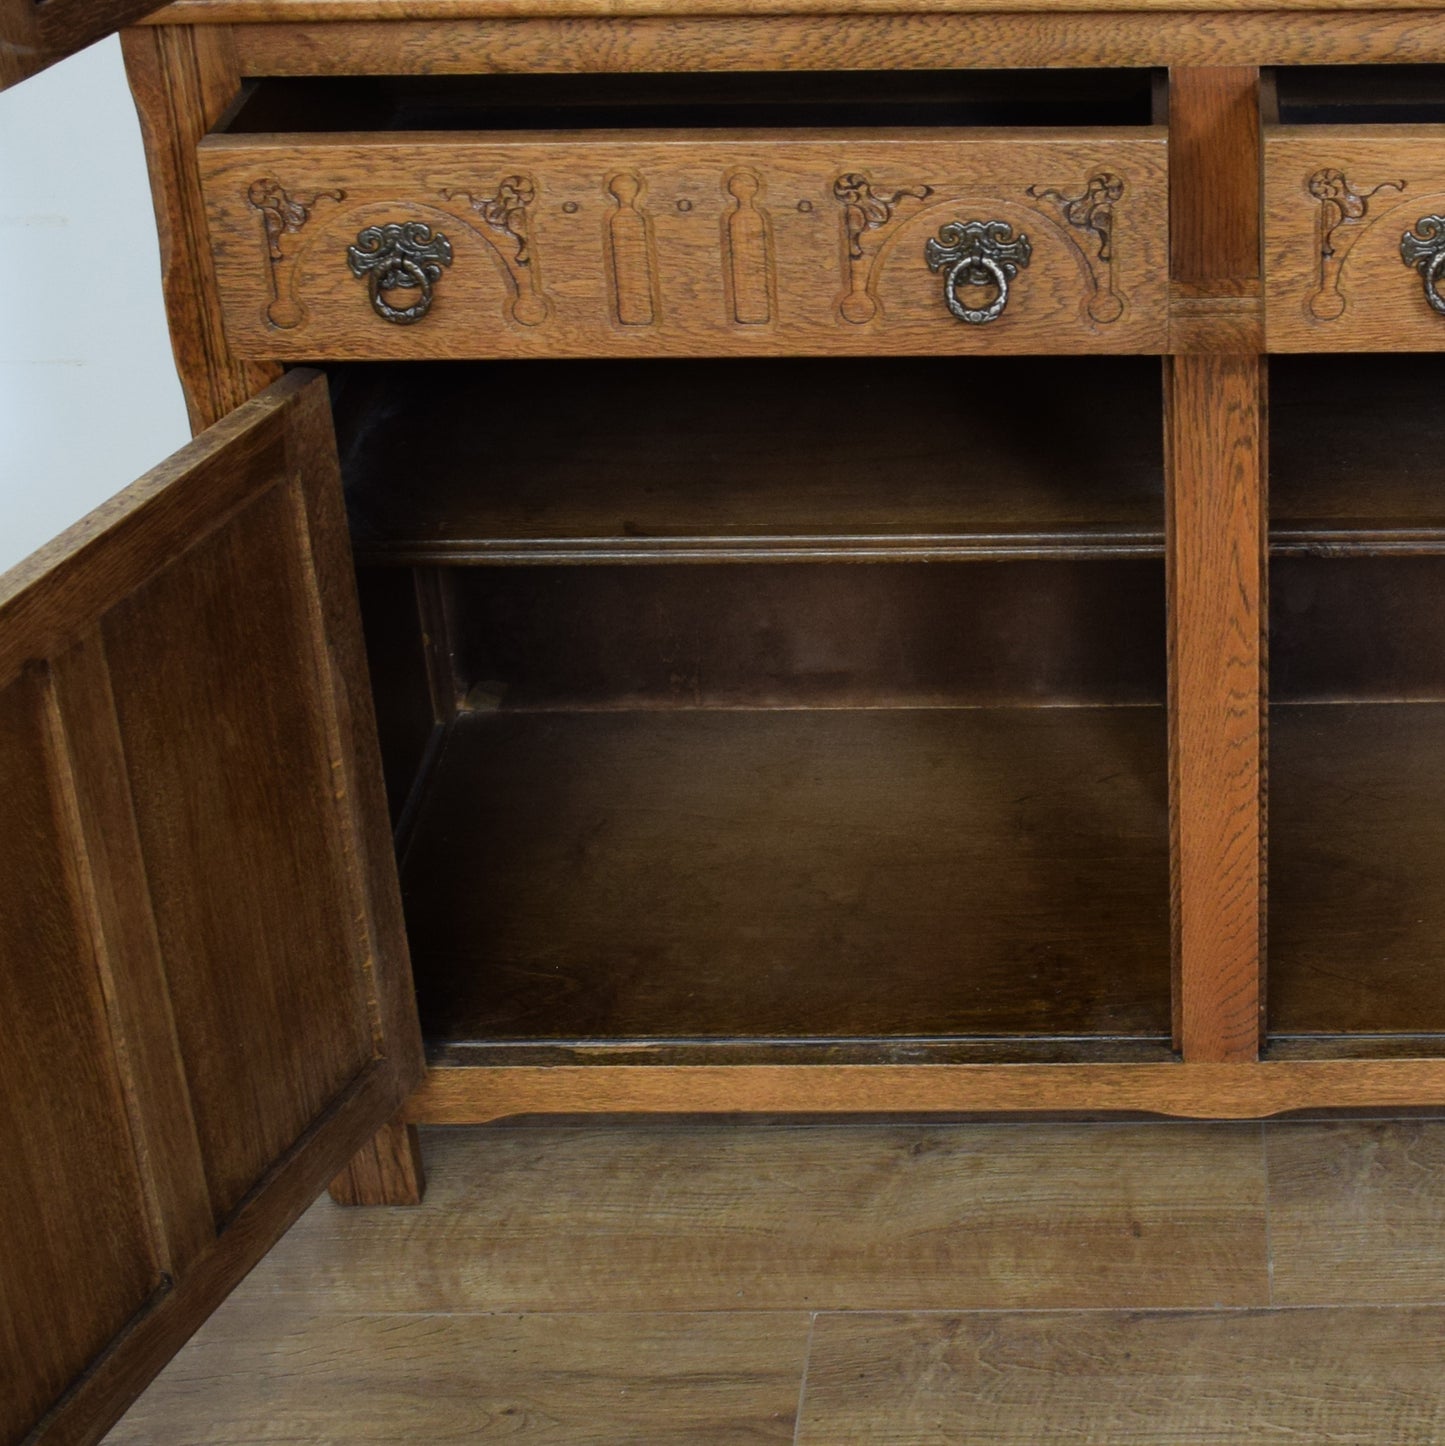 Restored Old Charm Court Cabinet